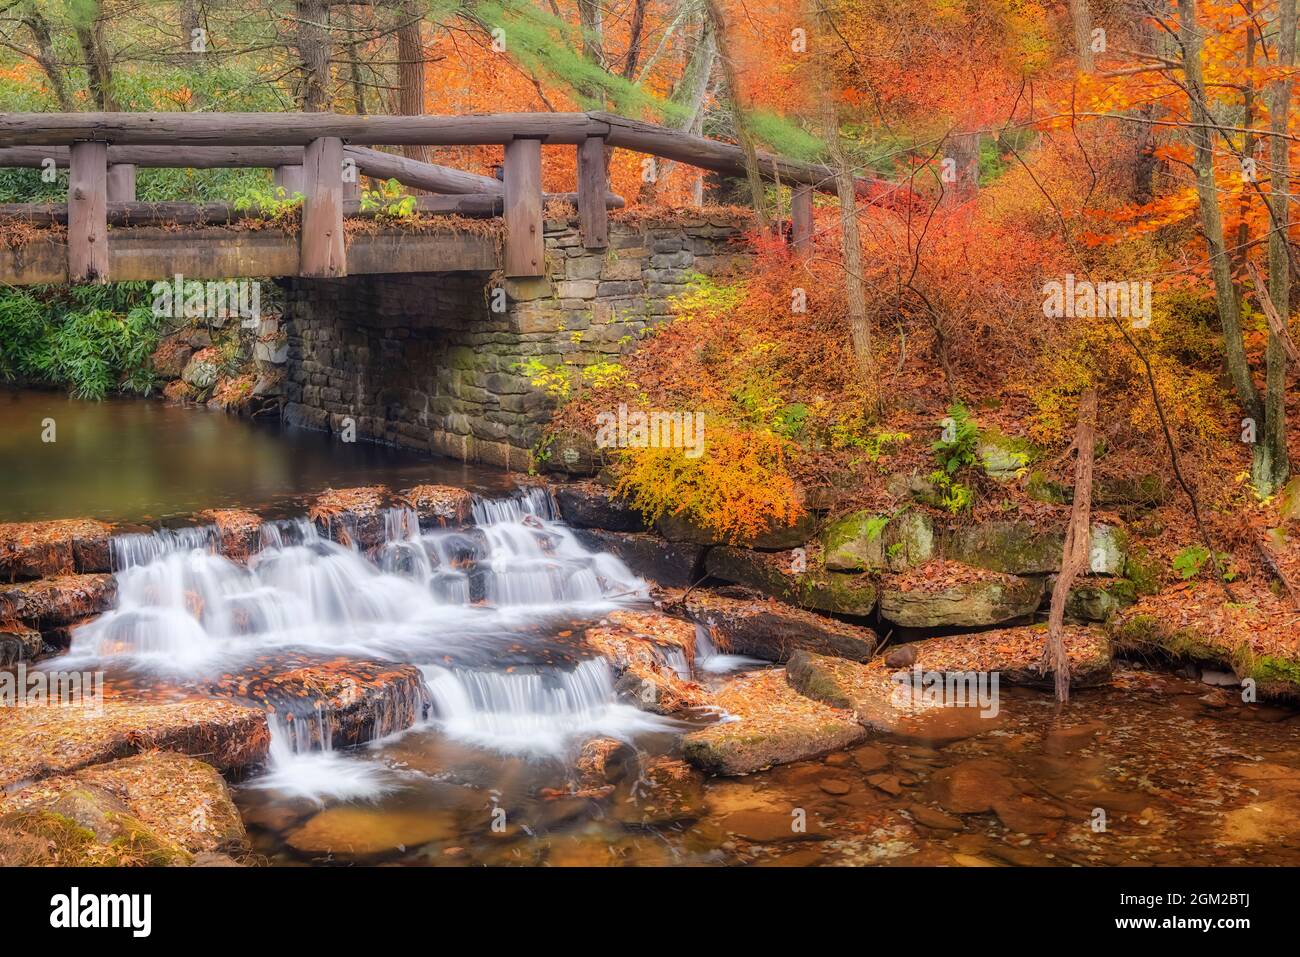 Just Water Under The Bridge - Fall foliage leaves cover the grounds surrounding this  cascade and wodden bridge at Hickory Run State Park in Pennsylva Stock Photo